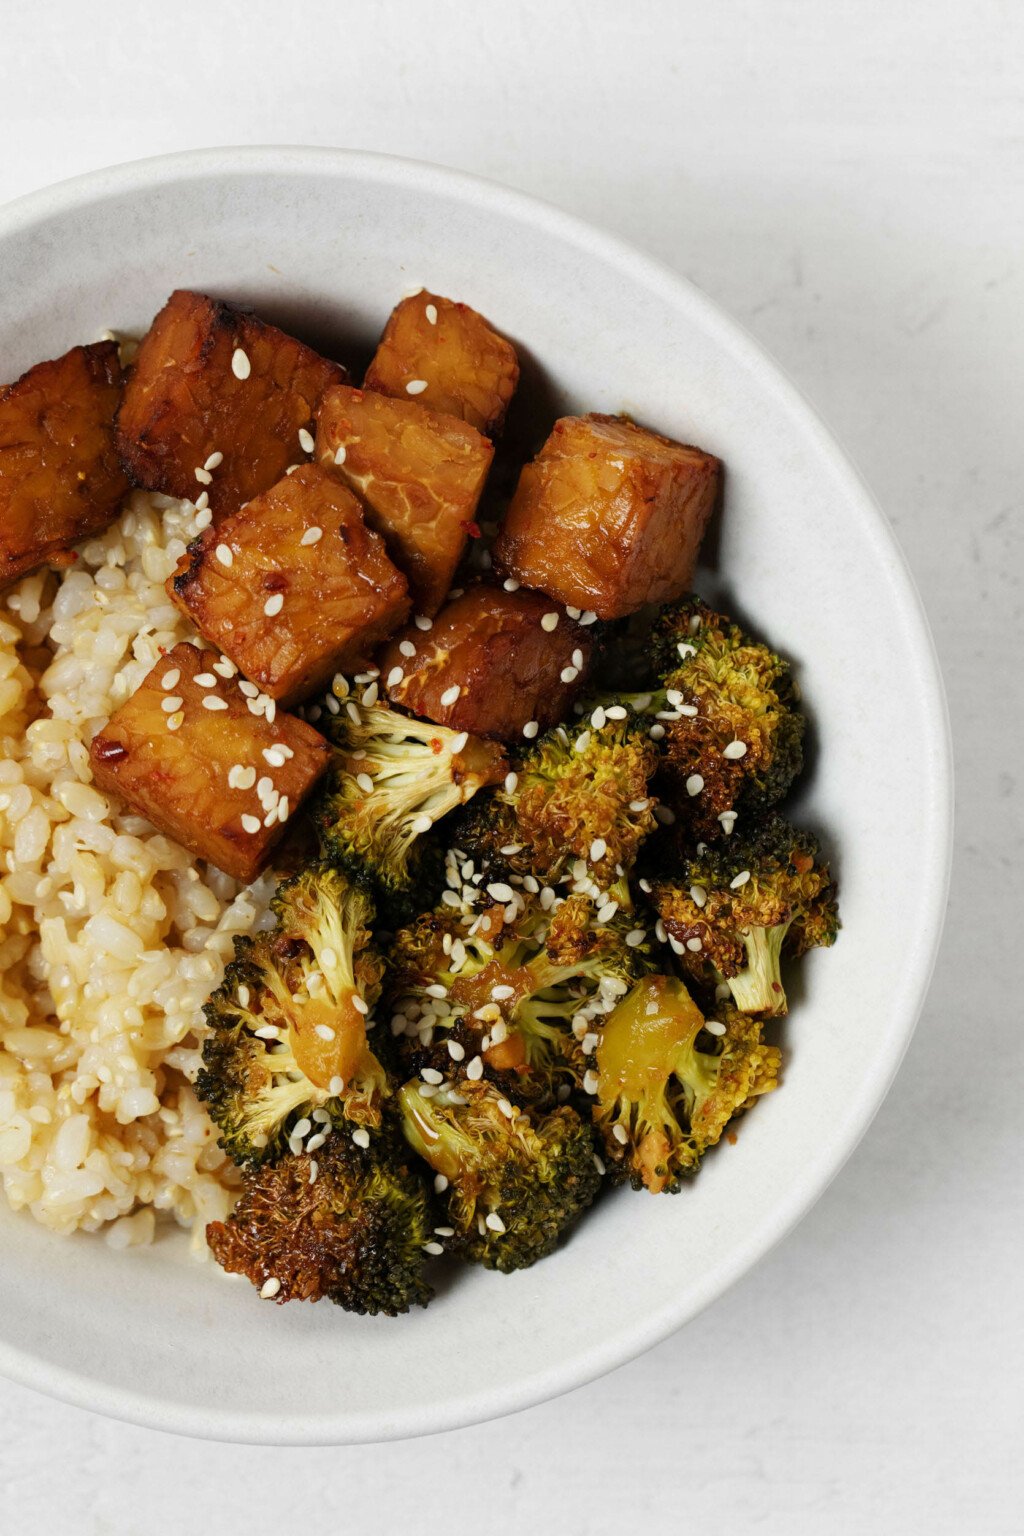 A closeup image of a vegan protein with glazed tempeh, sesame seeds, and brown rice.